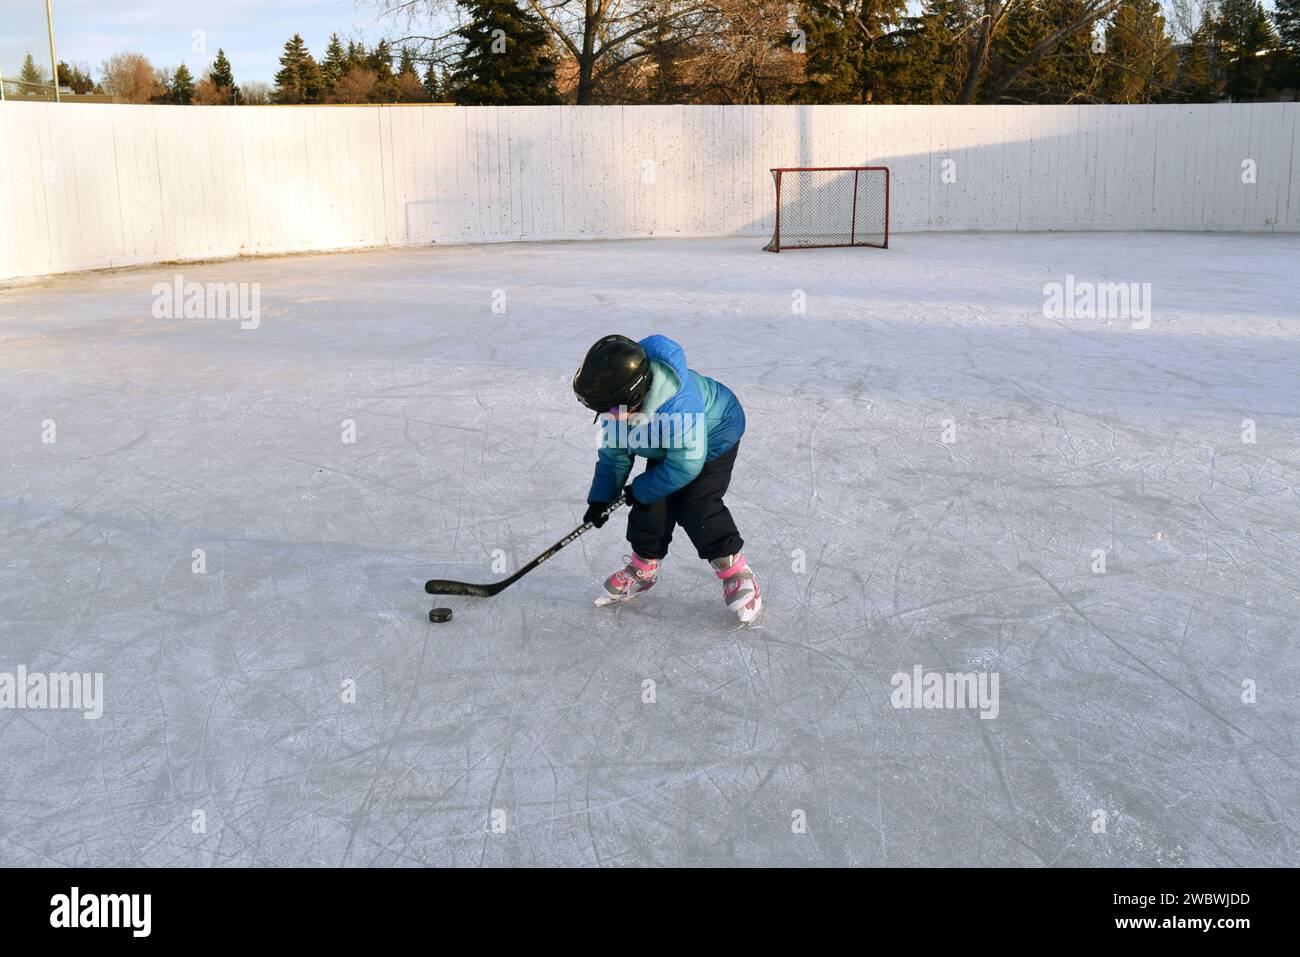 A young girl skates on an outdoor ice rink with a hockey stick in Edmonton, Alberta, Canada Stock Photo